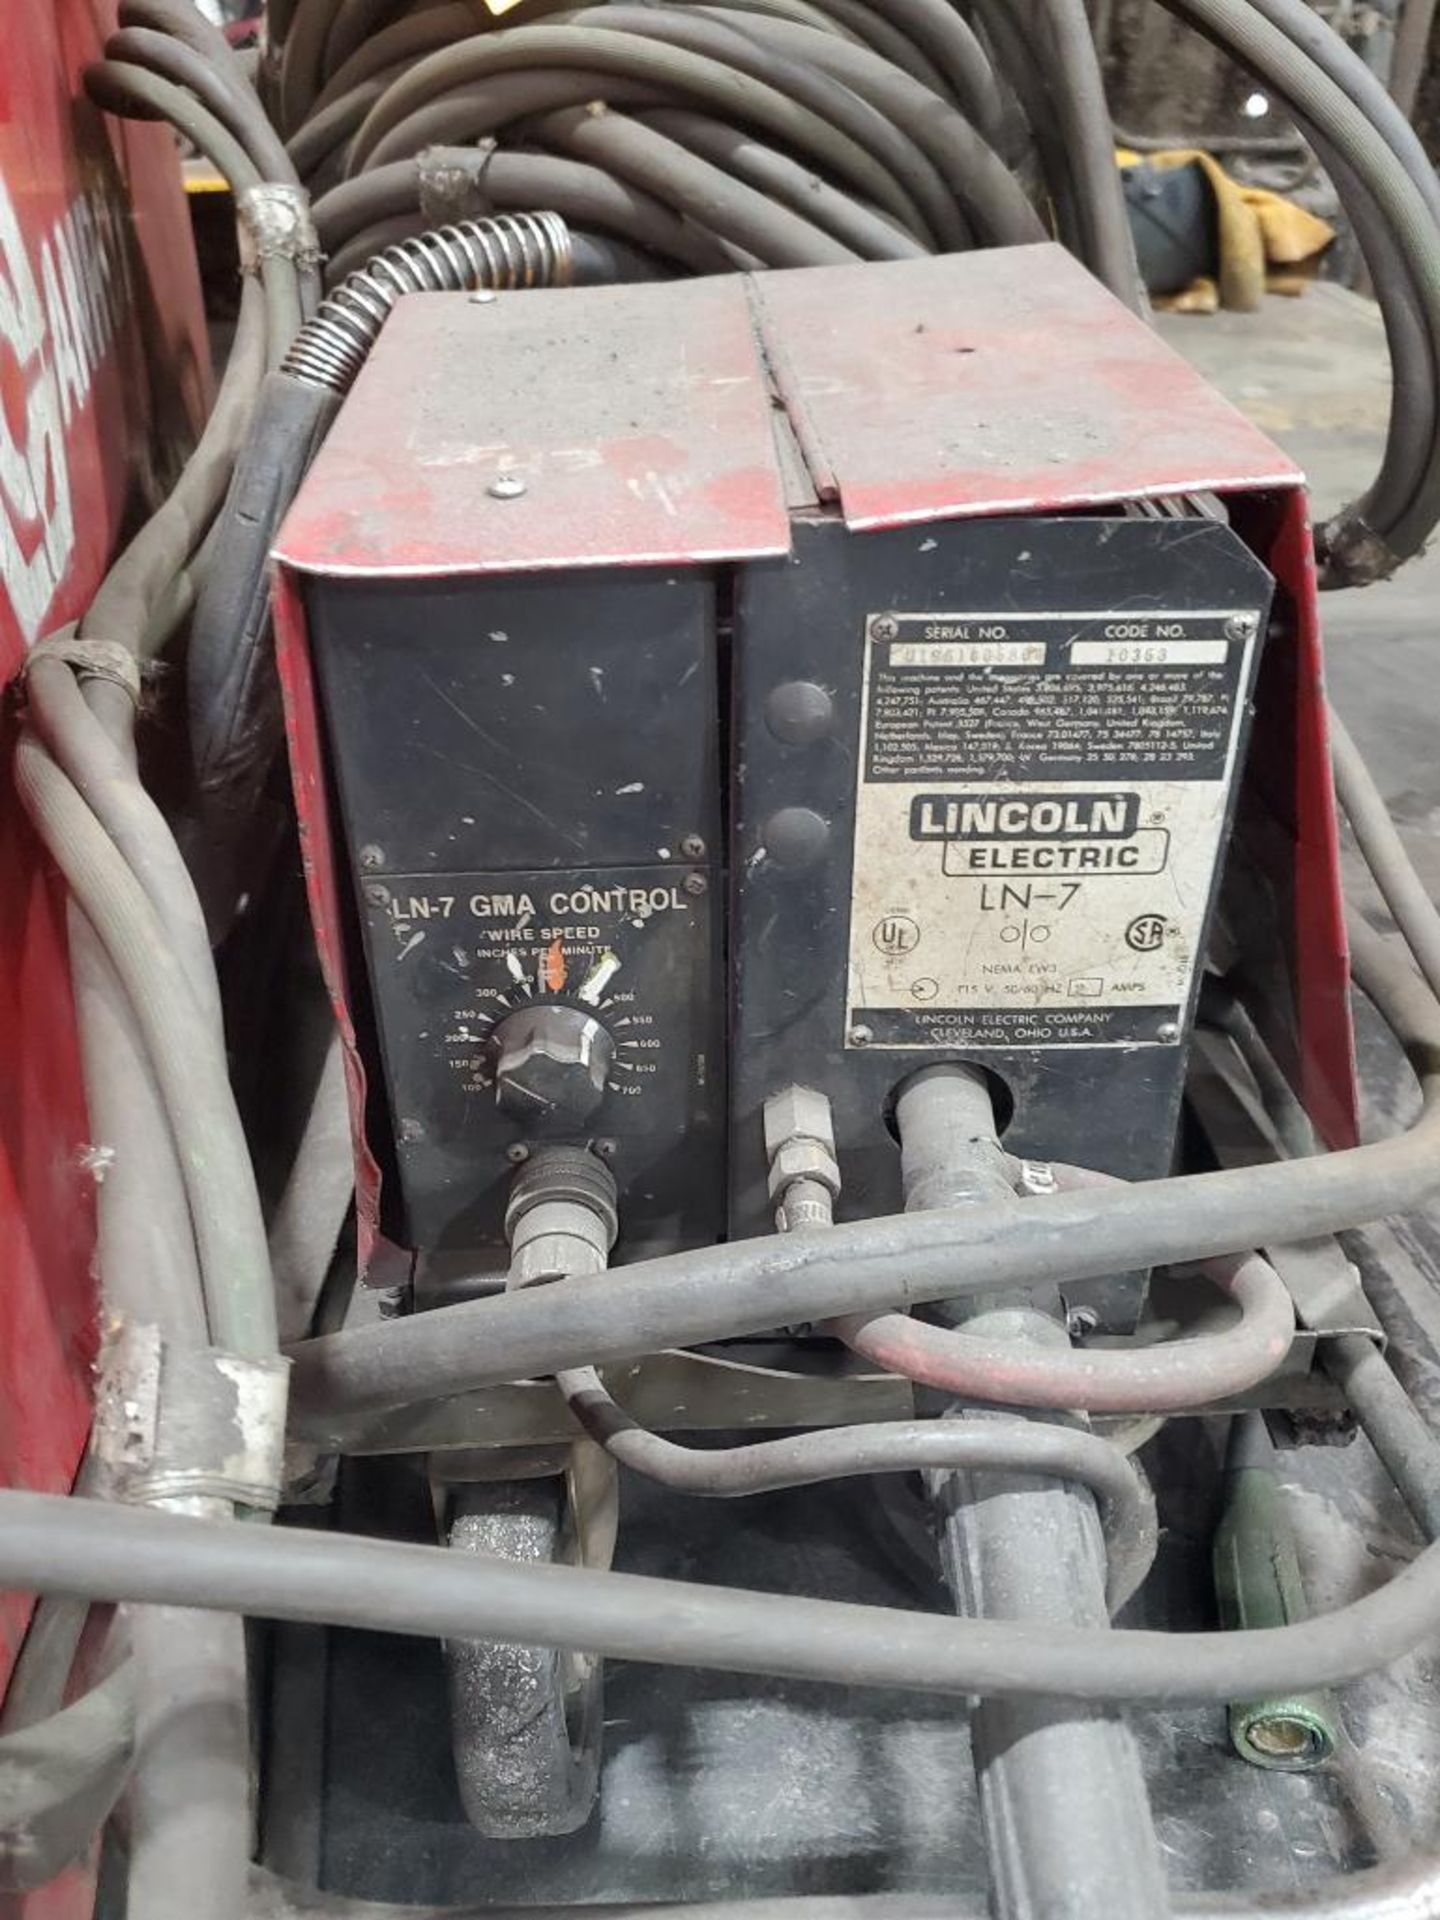 LINCOLN ELECTRIC IDEALARC DC-600 WELDER SN.U1970404564 230-460V WITH LN-7 WIRE FEED SN.U1961005864 - Image 6 of 8